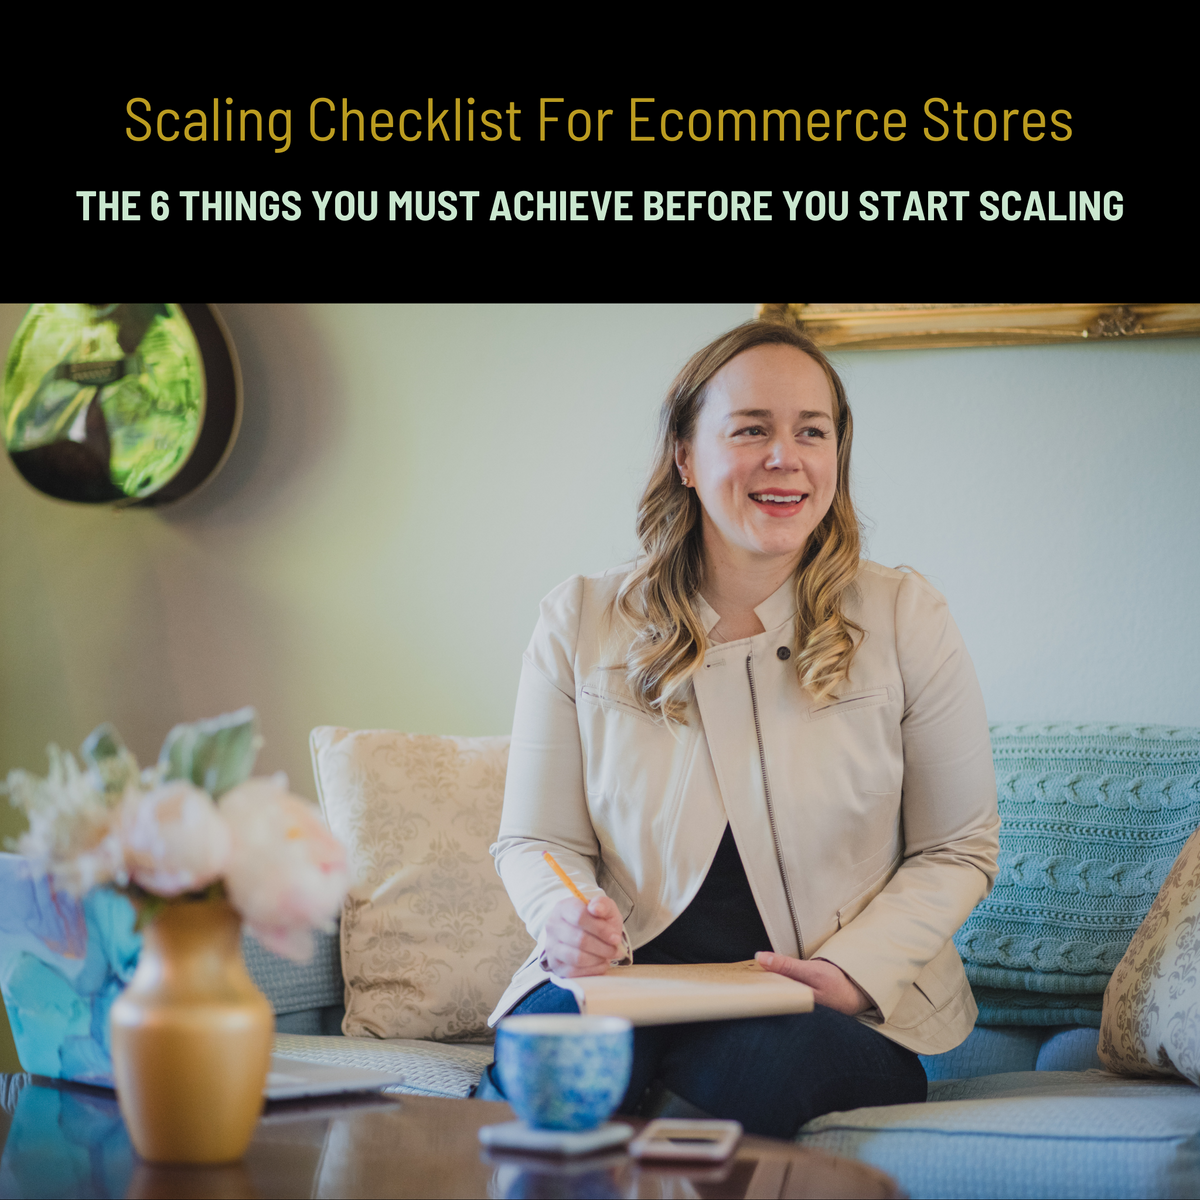 Scaling Checklist For Ecommerce Stores